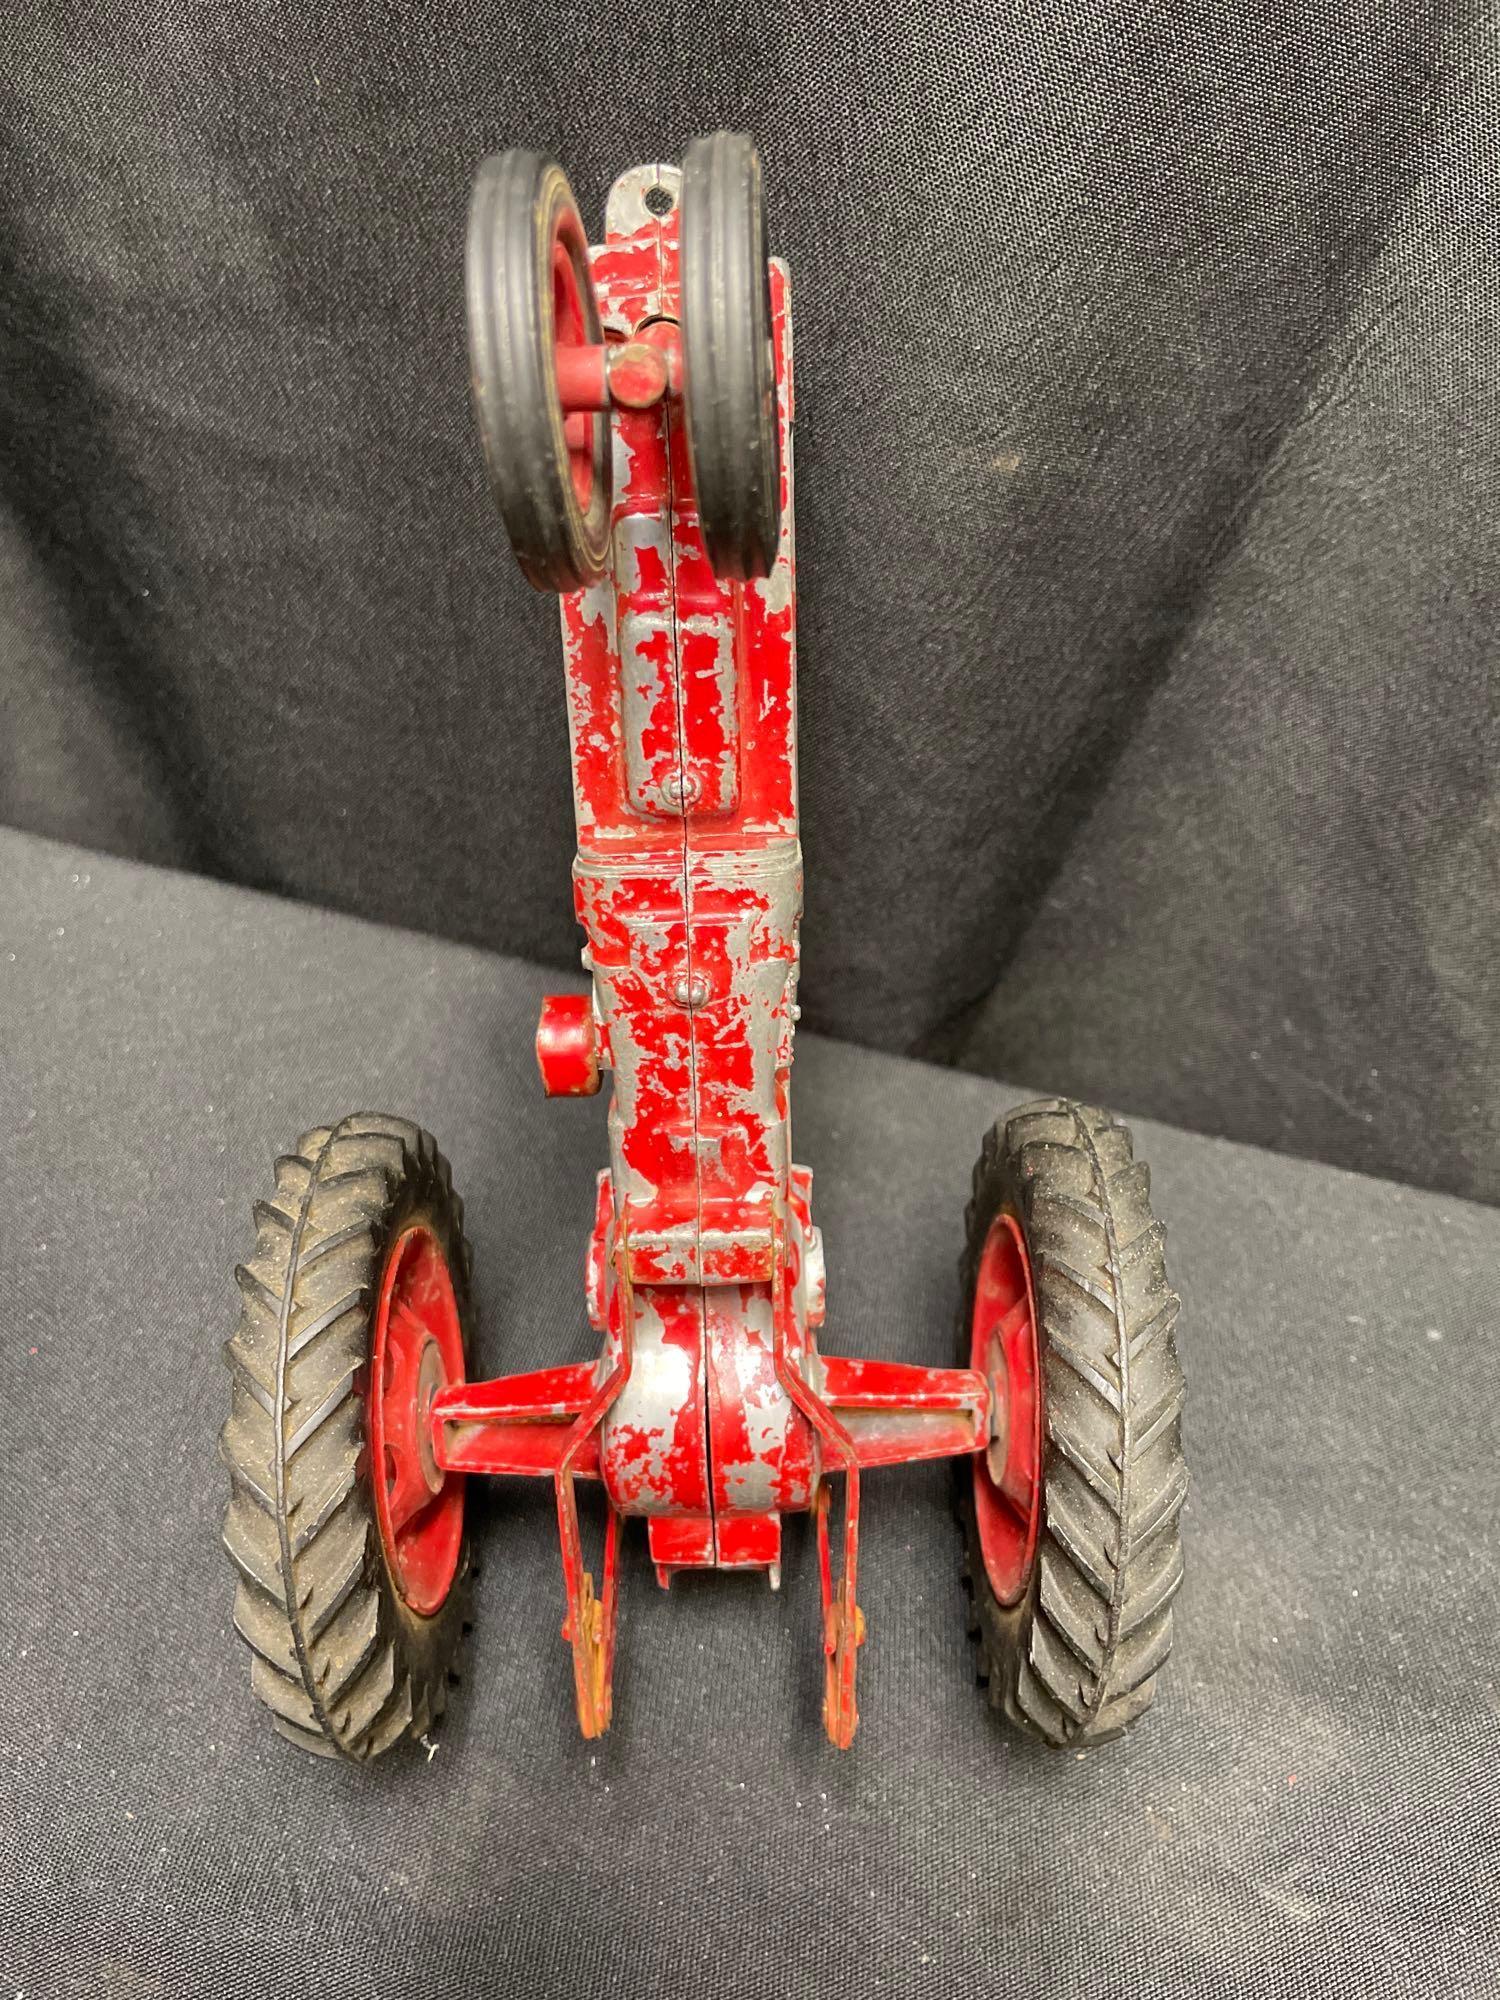 1/16th Scale Ertl Farmall 460 Tractor with 2 pt. hitch